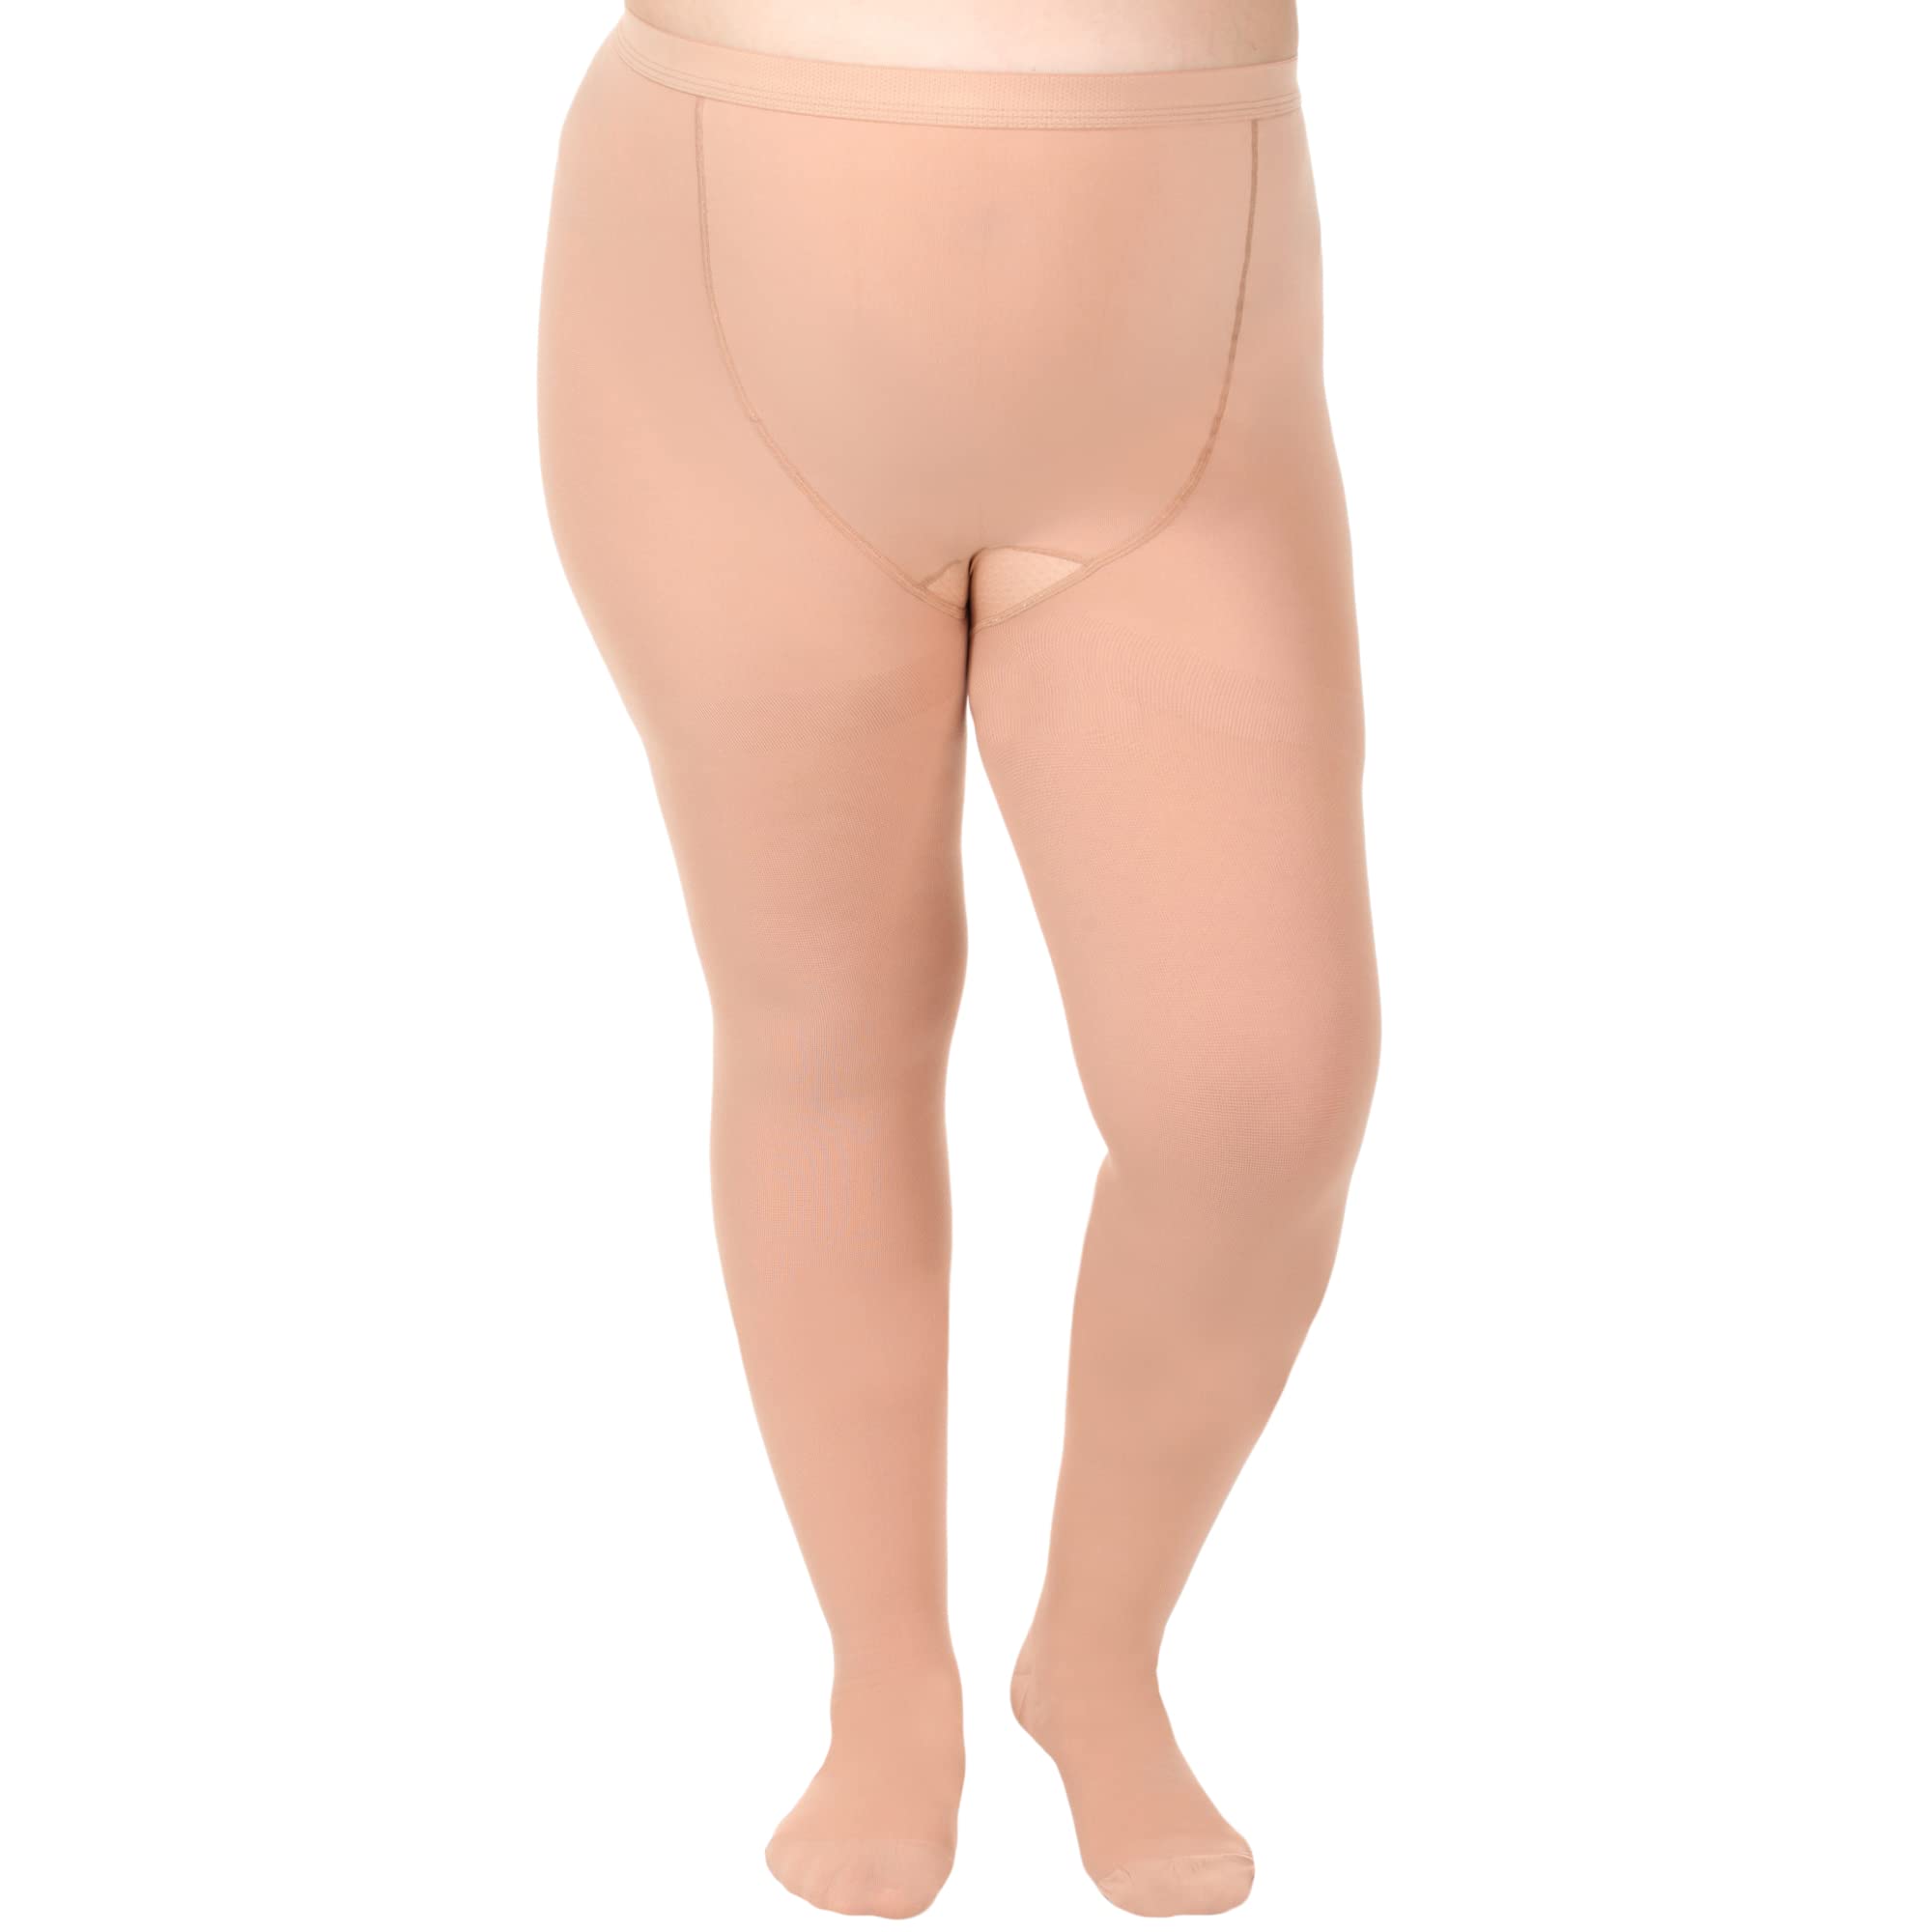  Opaque Compression Tights For Women 20-30mmHg